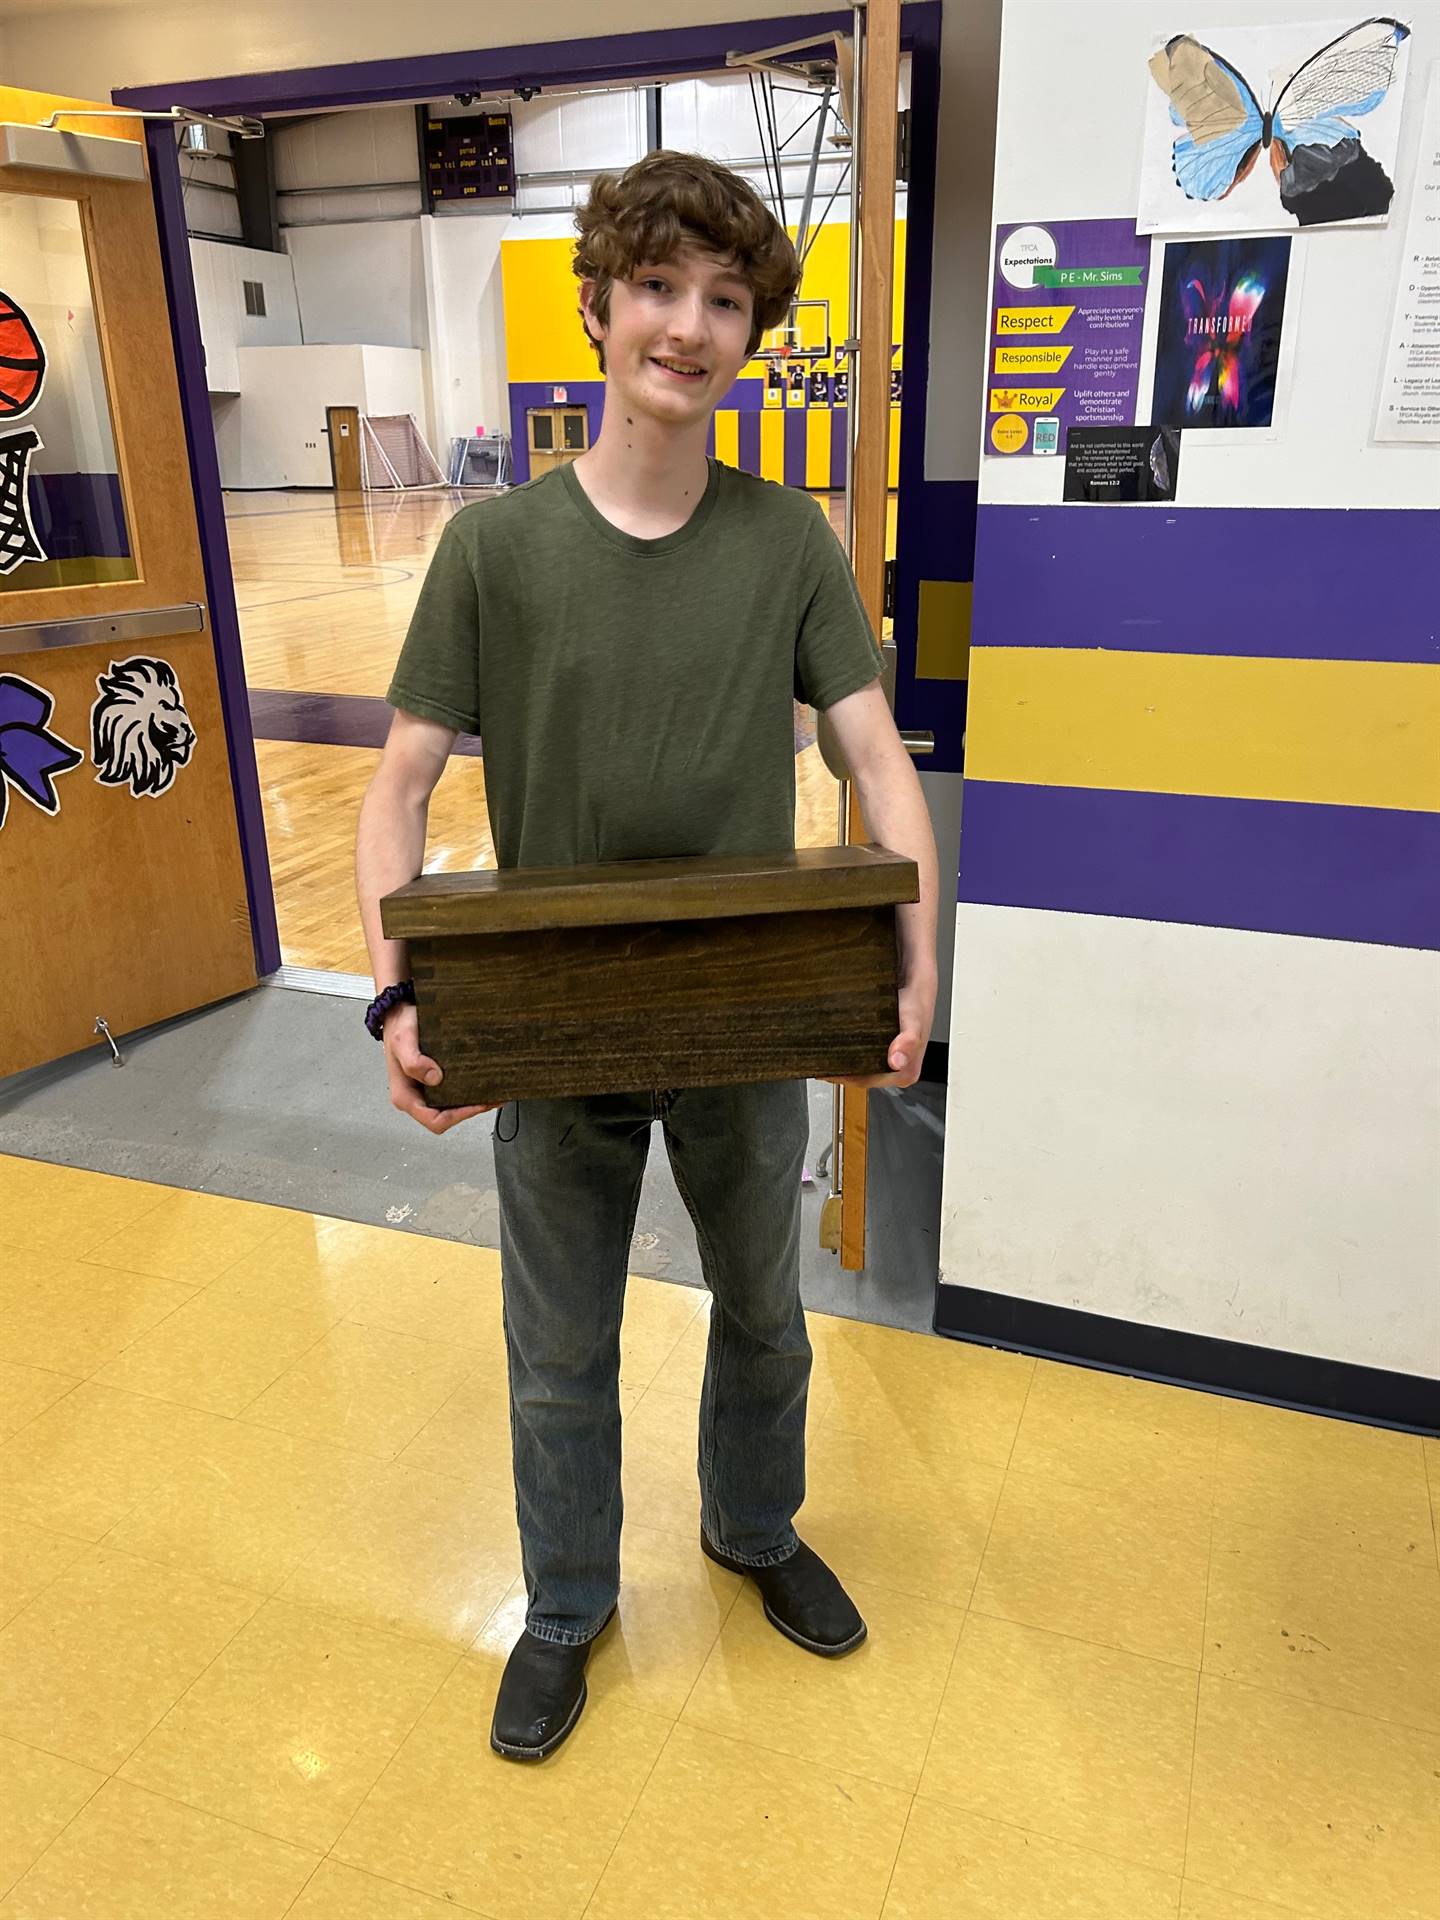 Austin with his finished project